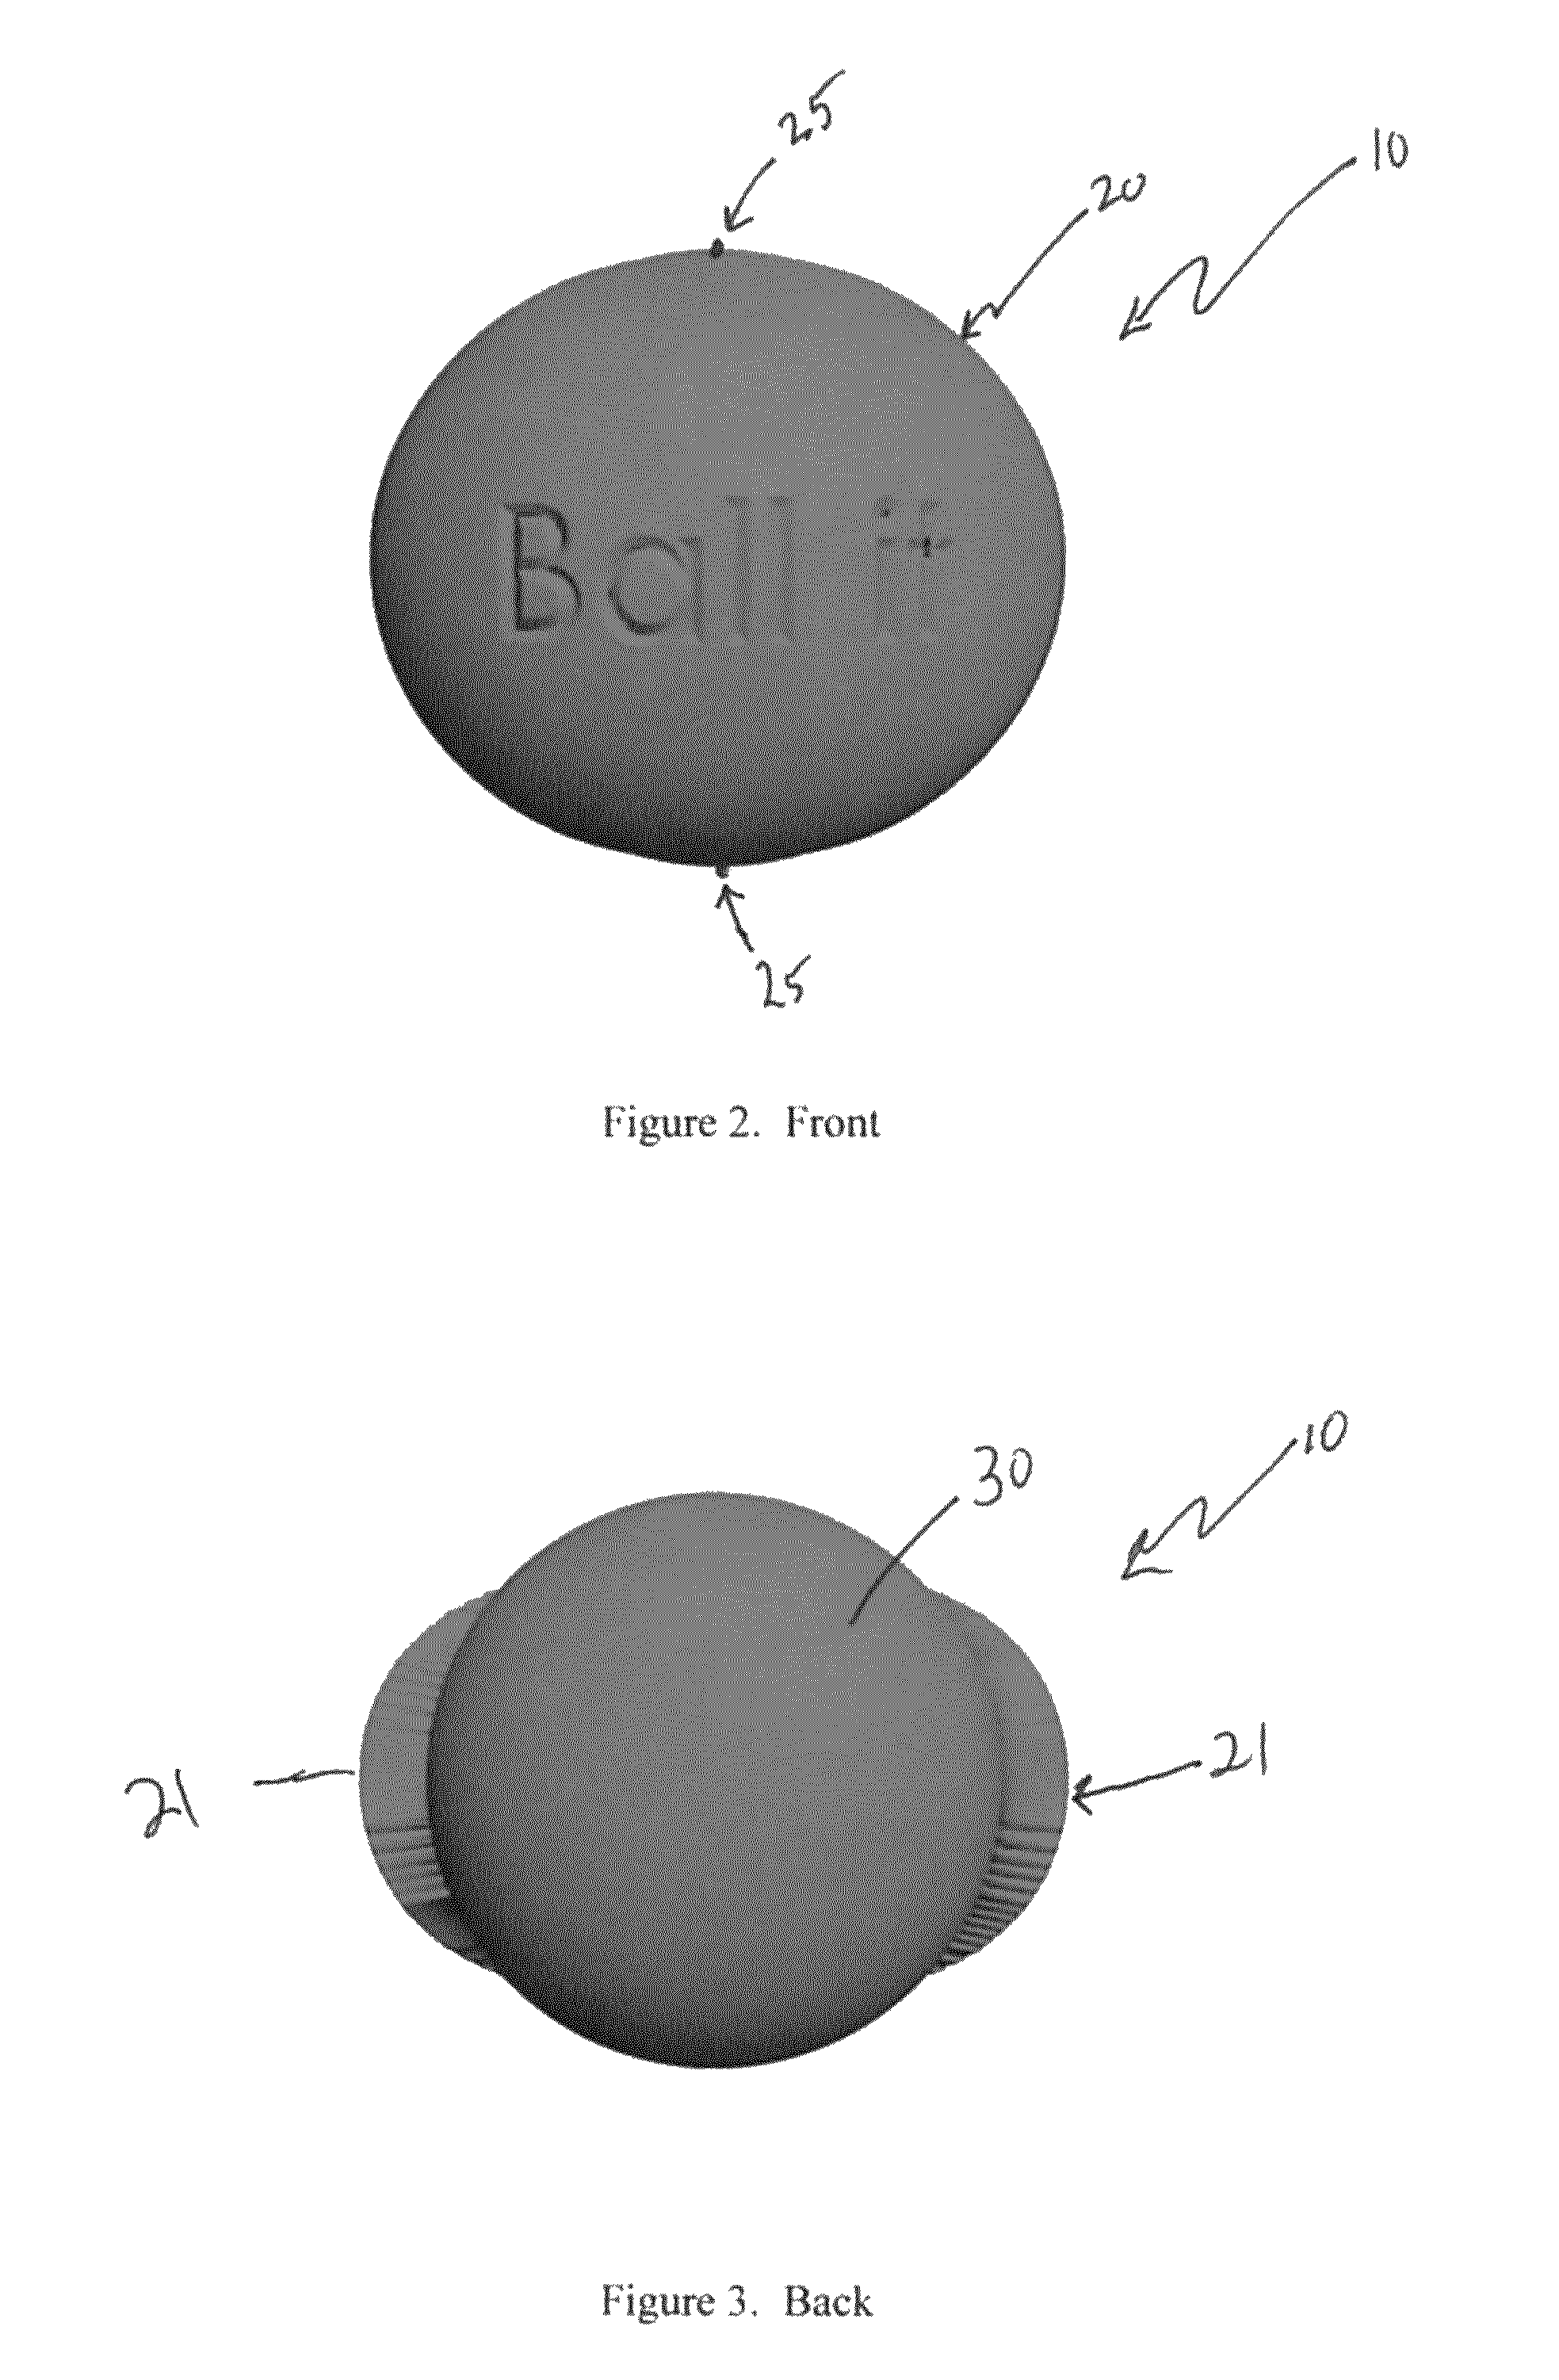 Facial muscle exercise ball-like device and method